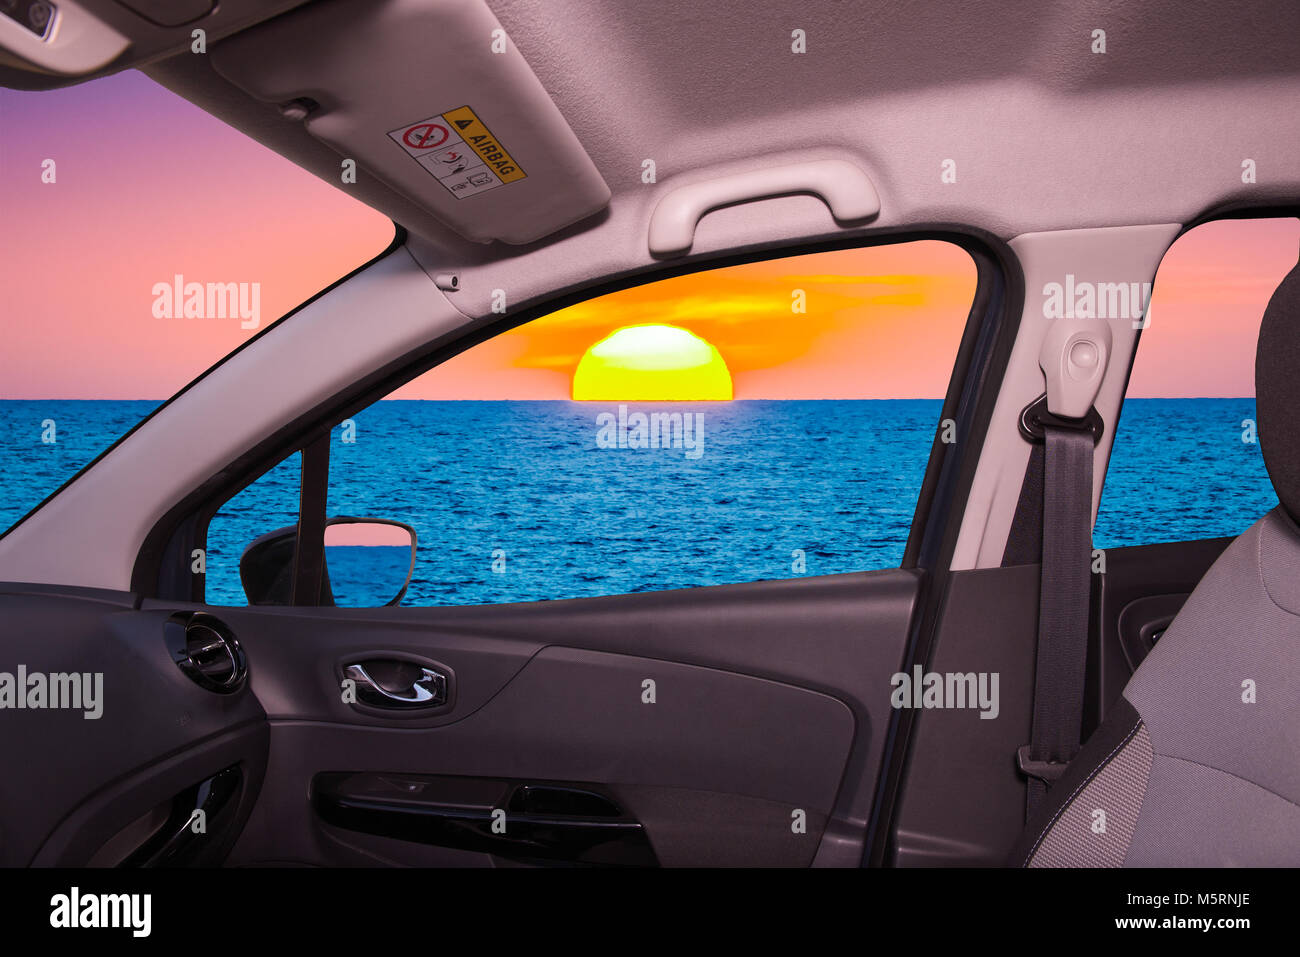 Looking through a car window with view of a scenic sunset by the mediterranean sea, Italy Stock Photo